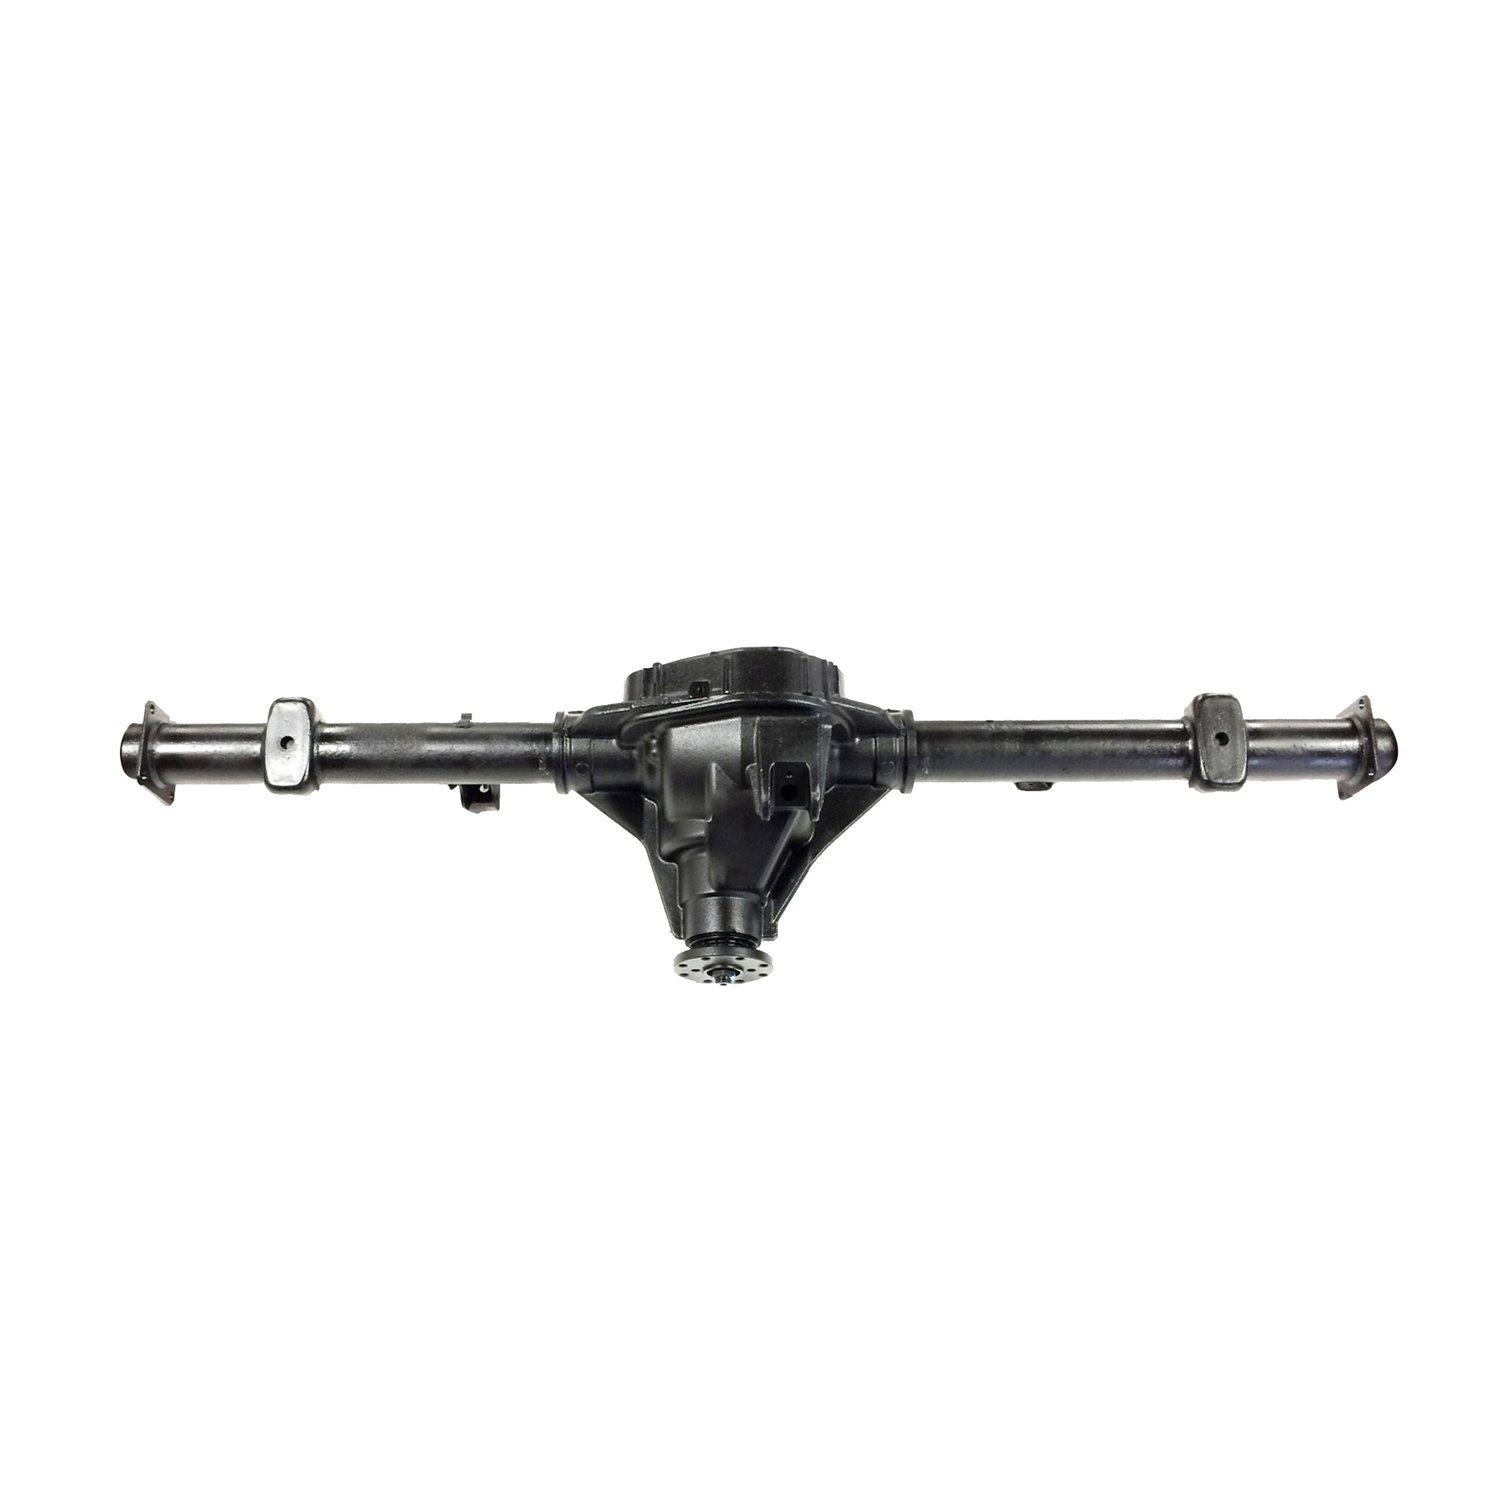 Remanufactured Complete Axle Assembly for Ford 9.75" 02-03 Ford E150 3.55 Ratio Disc